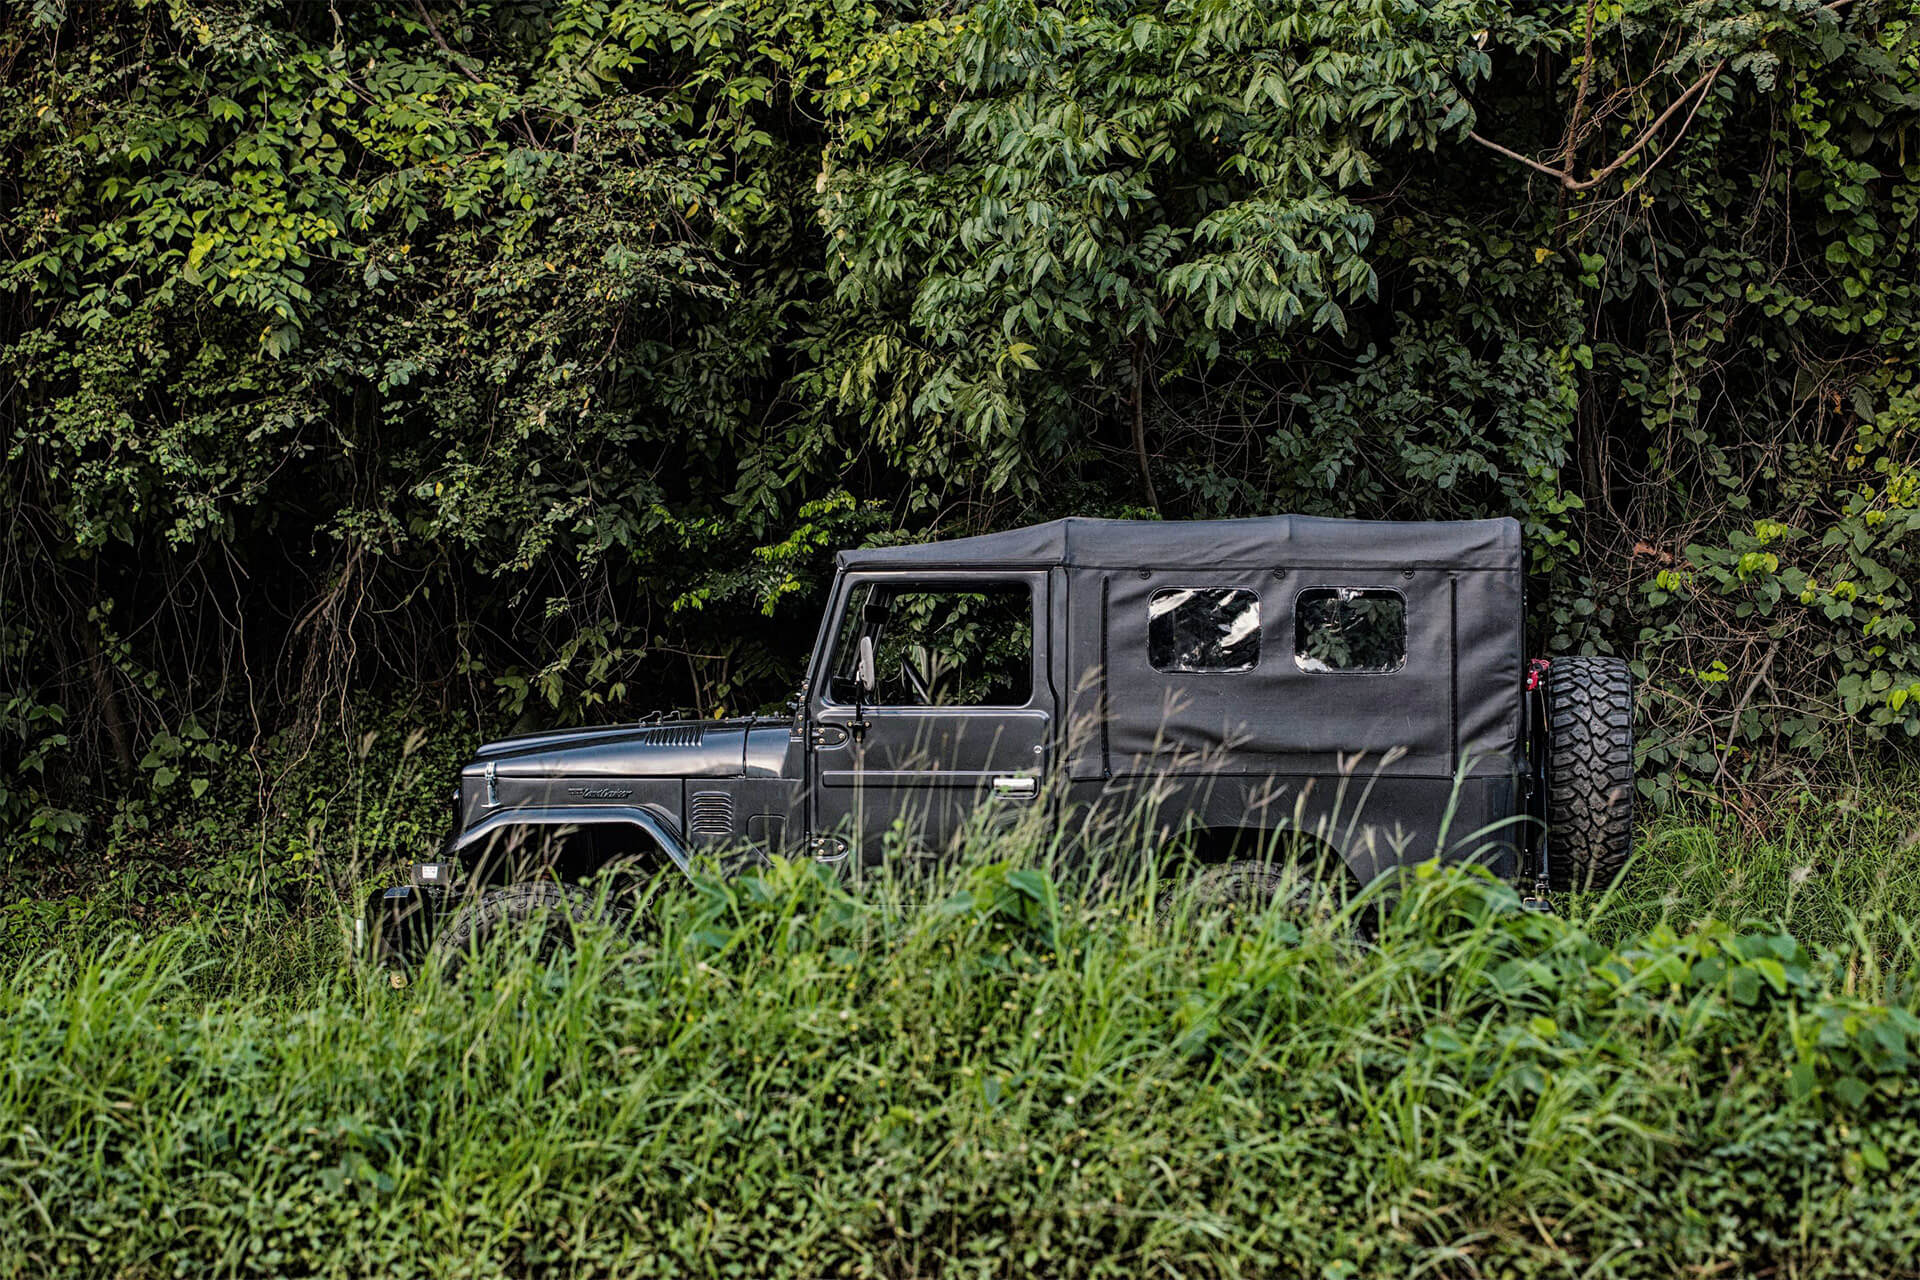 Black Land Cruiser with soft top in tall grass in a wooded area